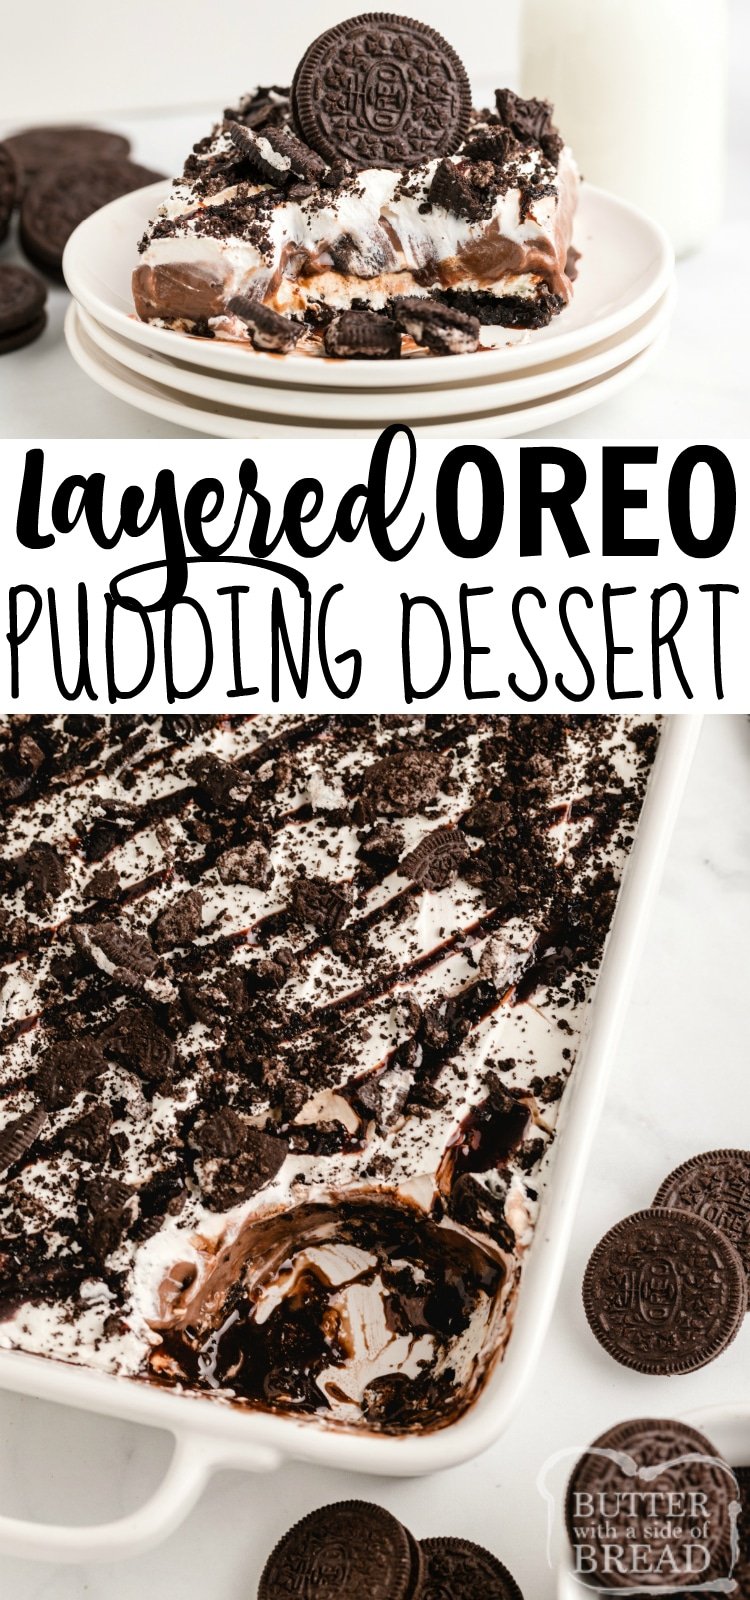 Layered Oreo Pudding Dessert is an easy dessert recipe made with Oreo cookies, cream cheese and chocolate and vanilla pudding! This dessert recipe is served cold - it's perfect for summer!